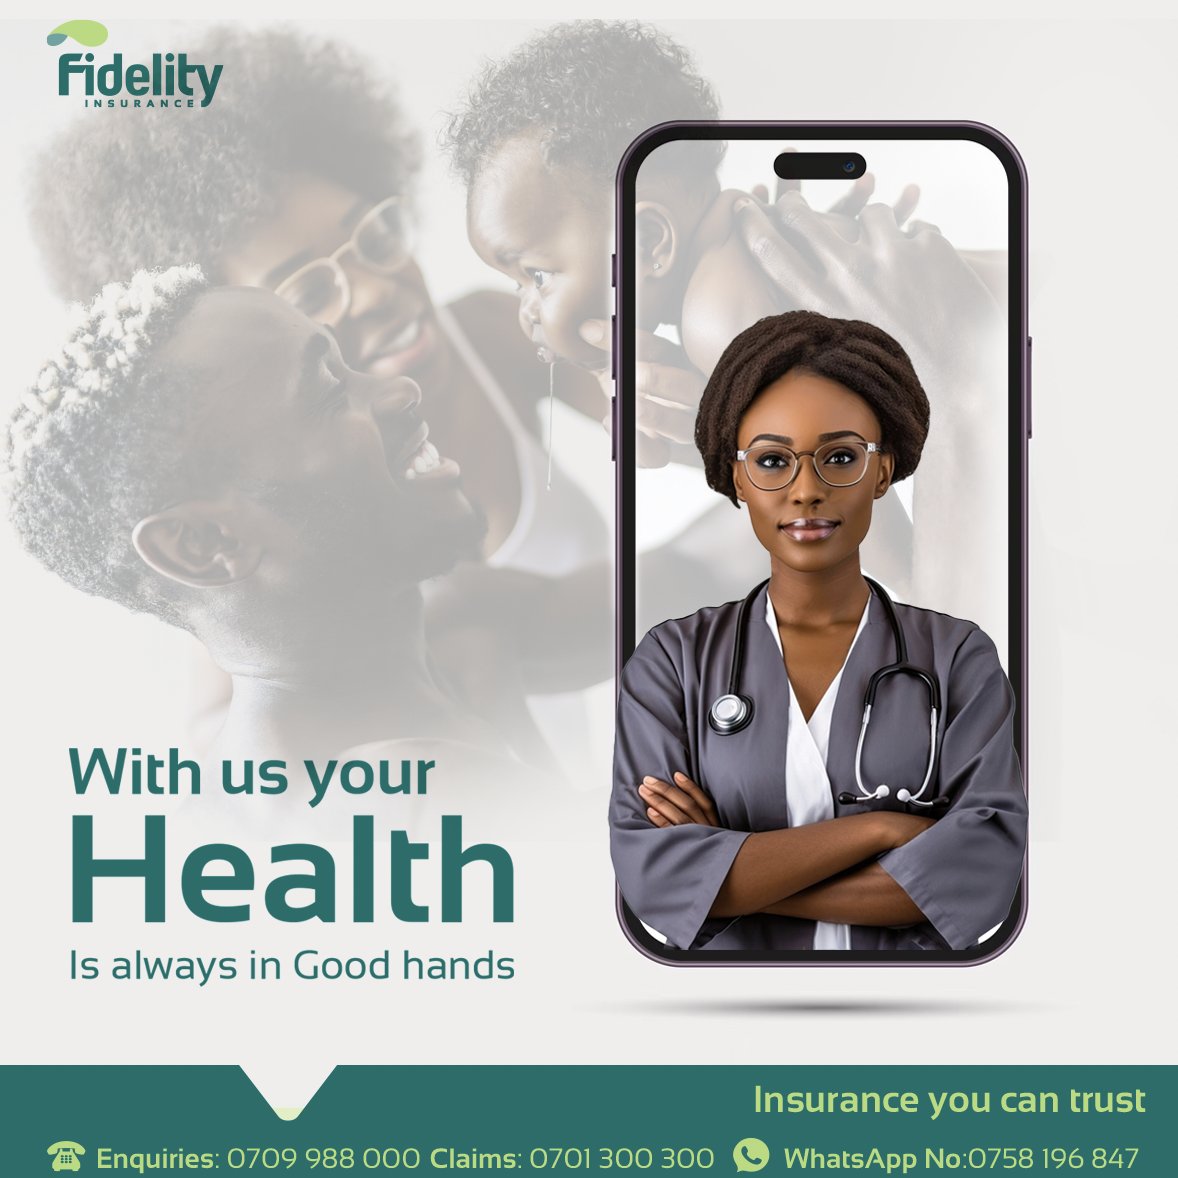 Life's accidents shouldn't derail your plans. Stay protected with our comprehensive medical insurance coverage. Call us today on 0709988000 for the best medical insurance package for you and your loved ones.
#fidelityinsurance #insuranceyoucantrust #medicalinsurance #insurance